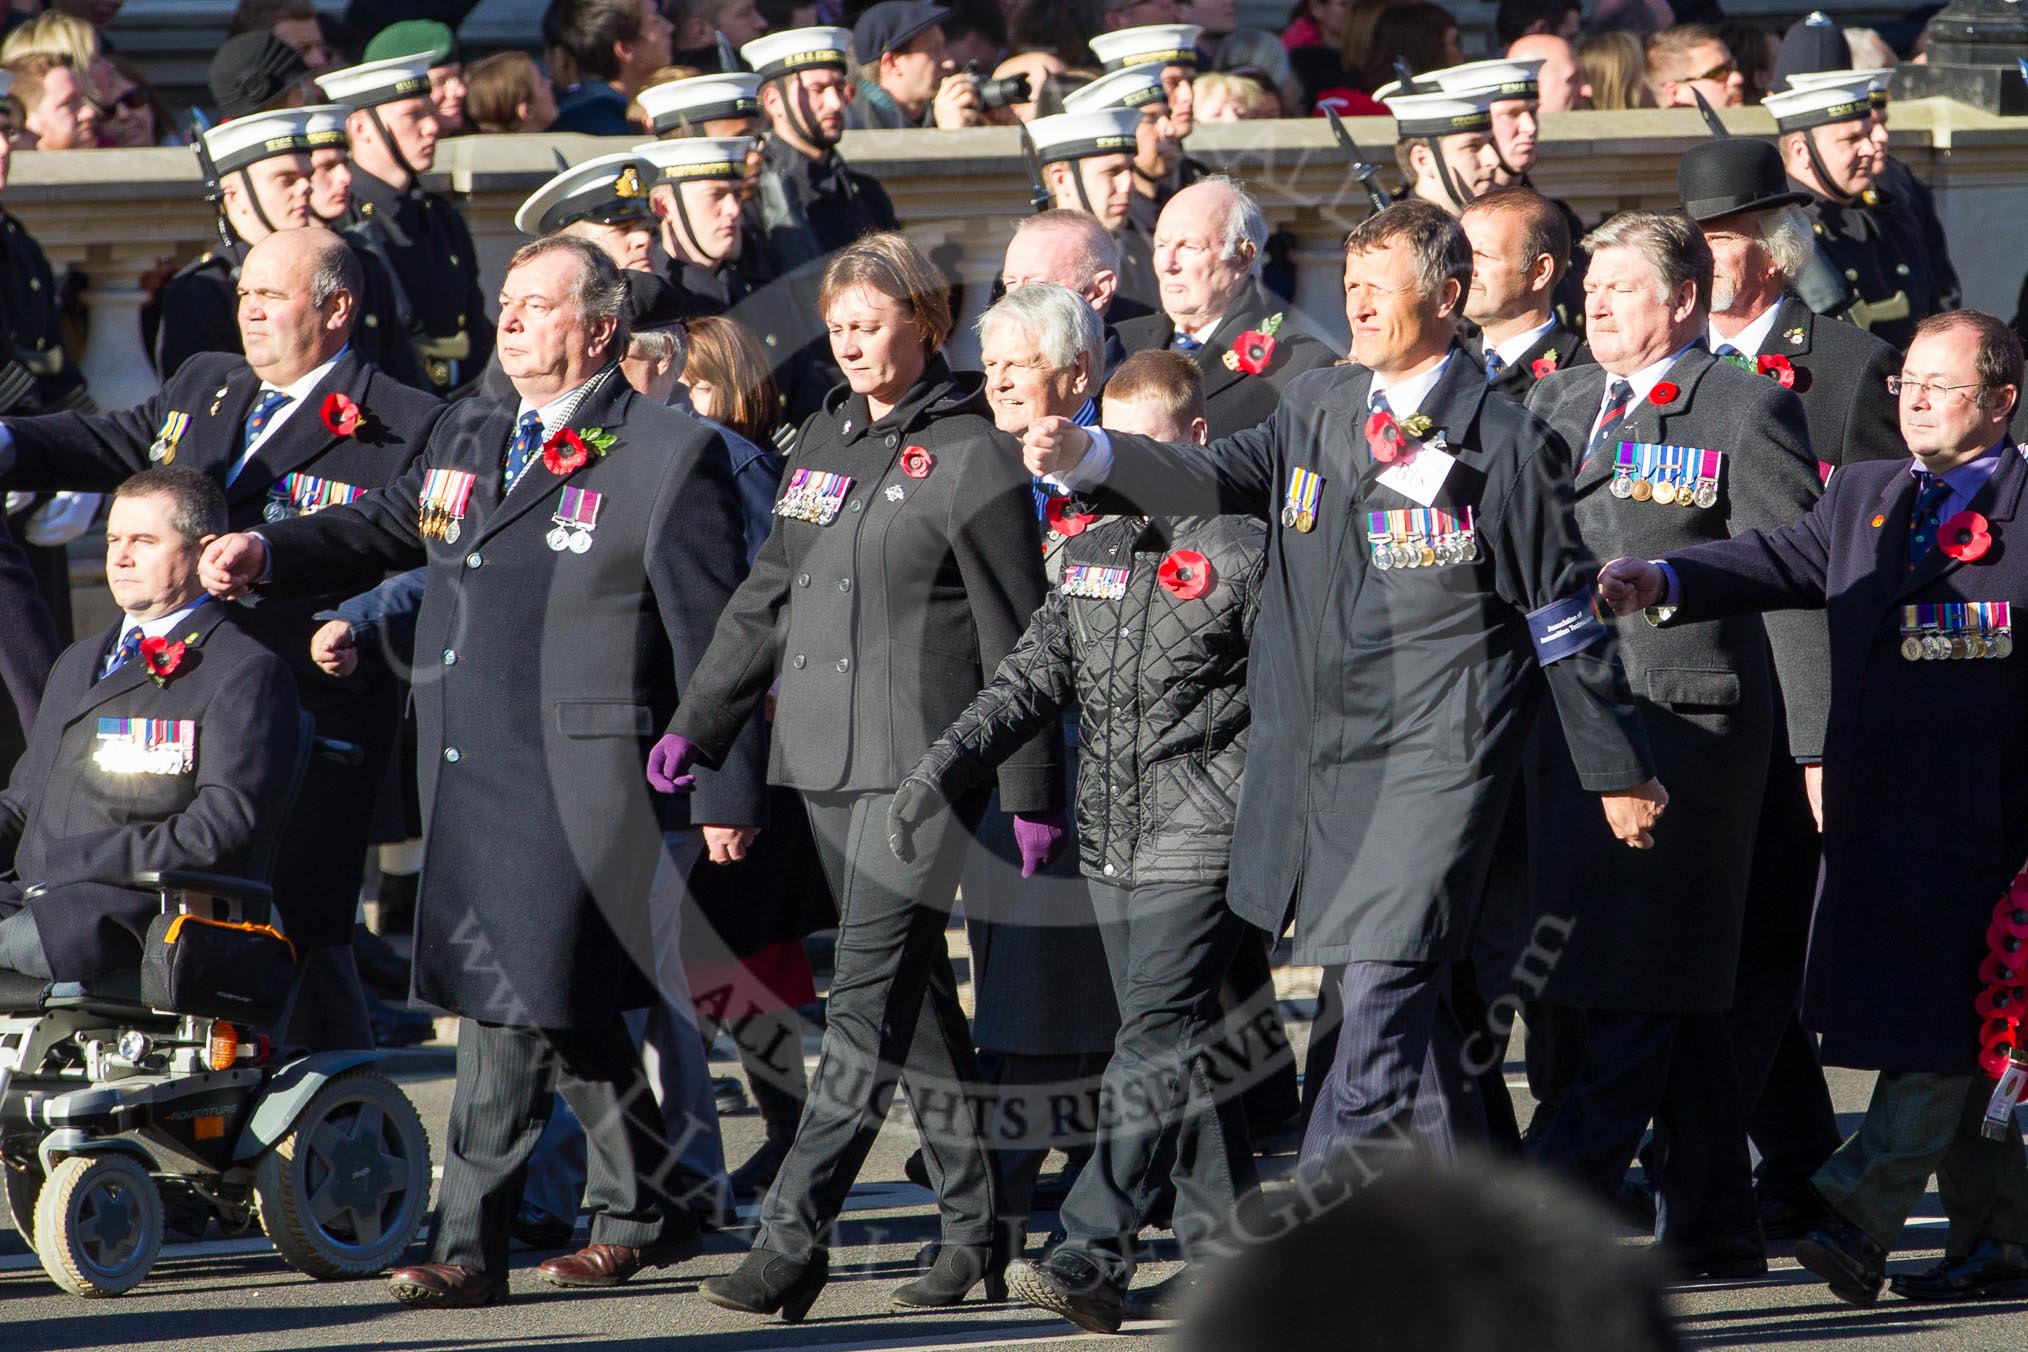 Remembrance Sunday 2012 Cenotaph March Past: Group B18 - Association of Ammunition Technicians..
Whitehall, Cenotaph,
London SW1,

United Kingdom,
on 11 November 2012 at 11:57, image #922